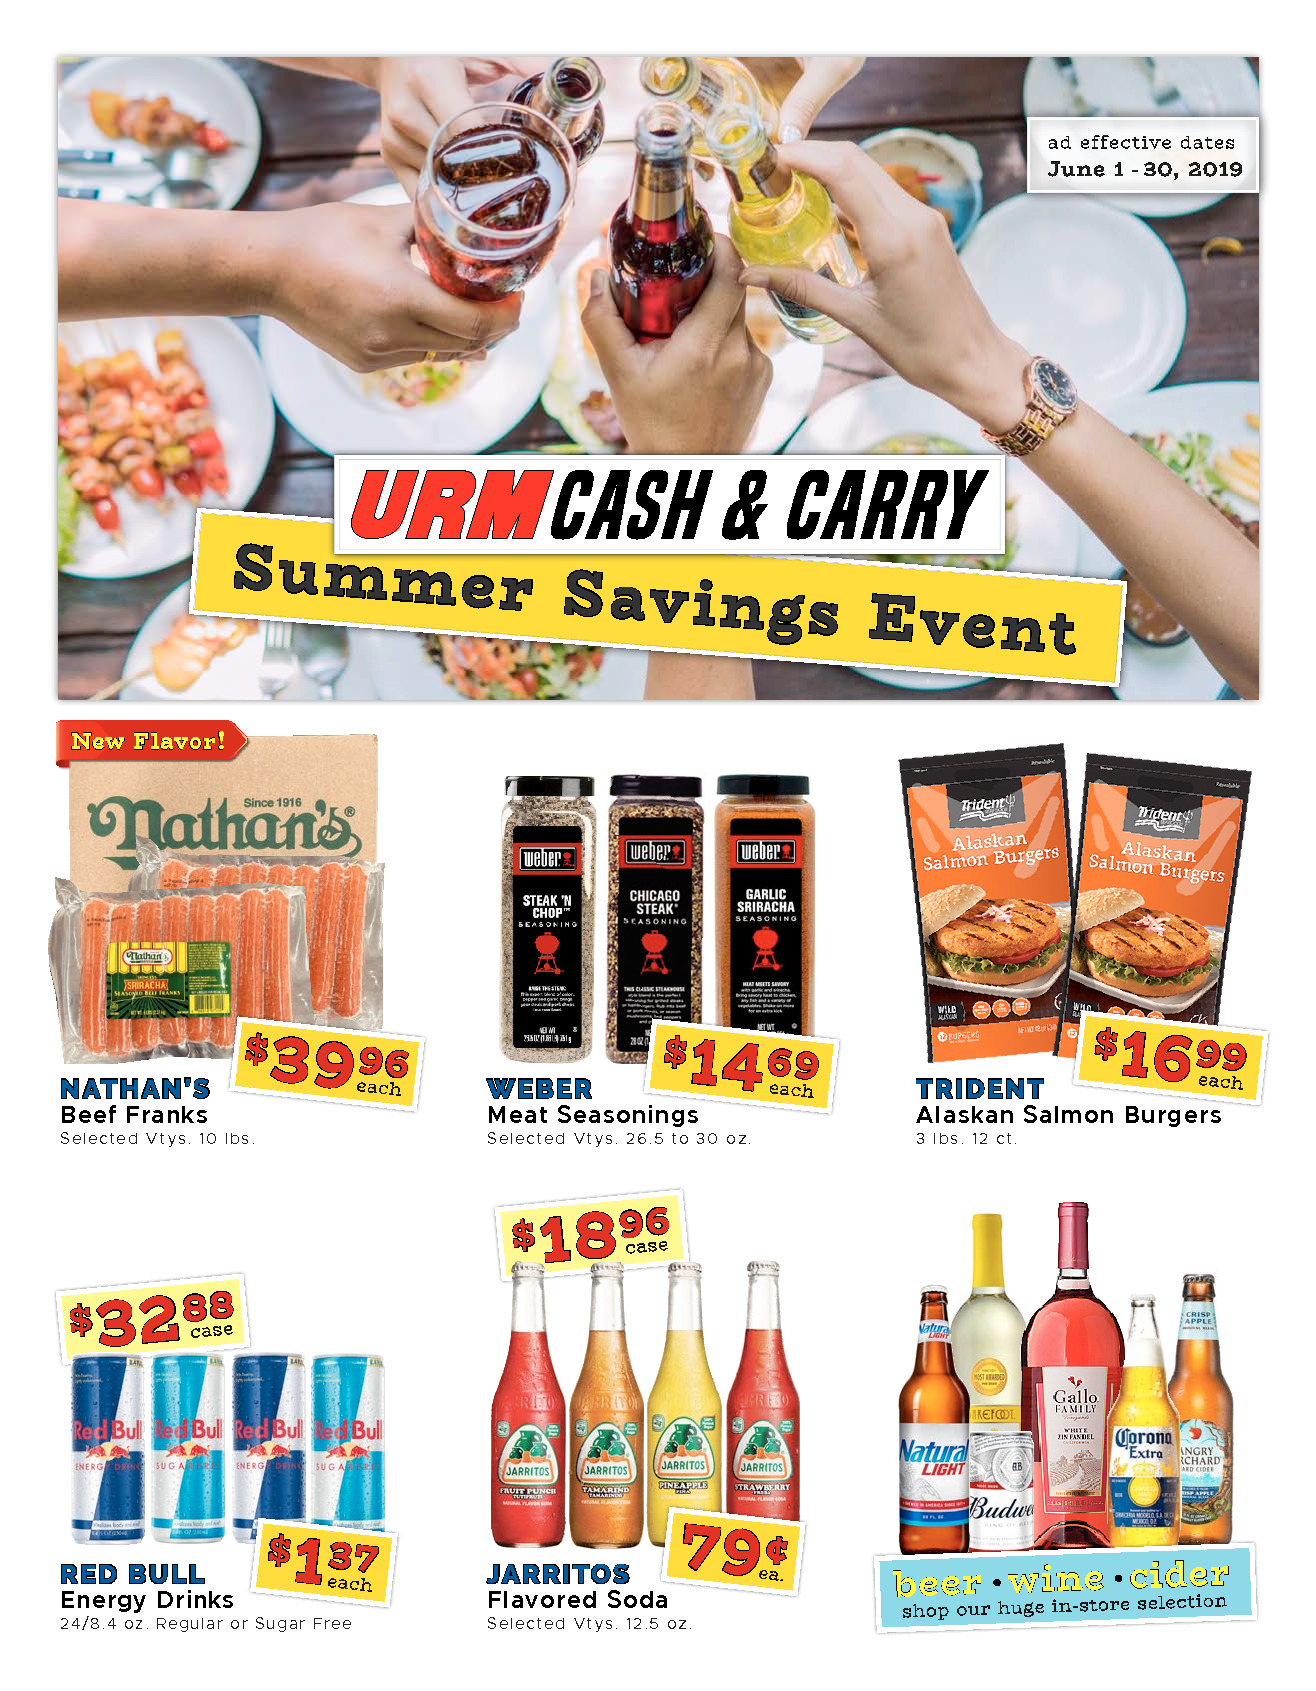 Cash And Carry Ad Urm Cash And Carry